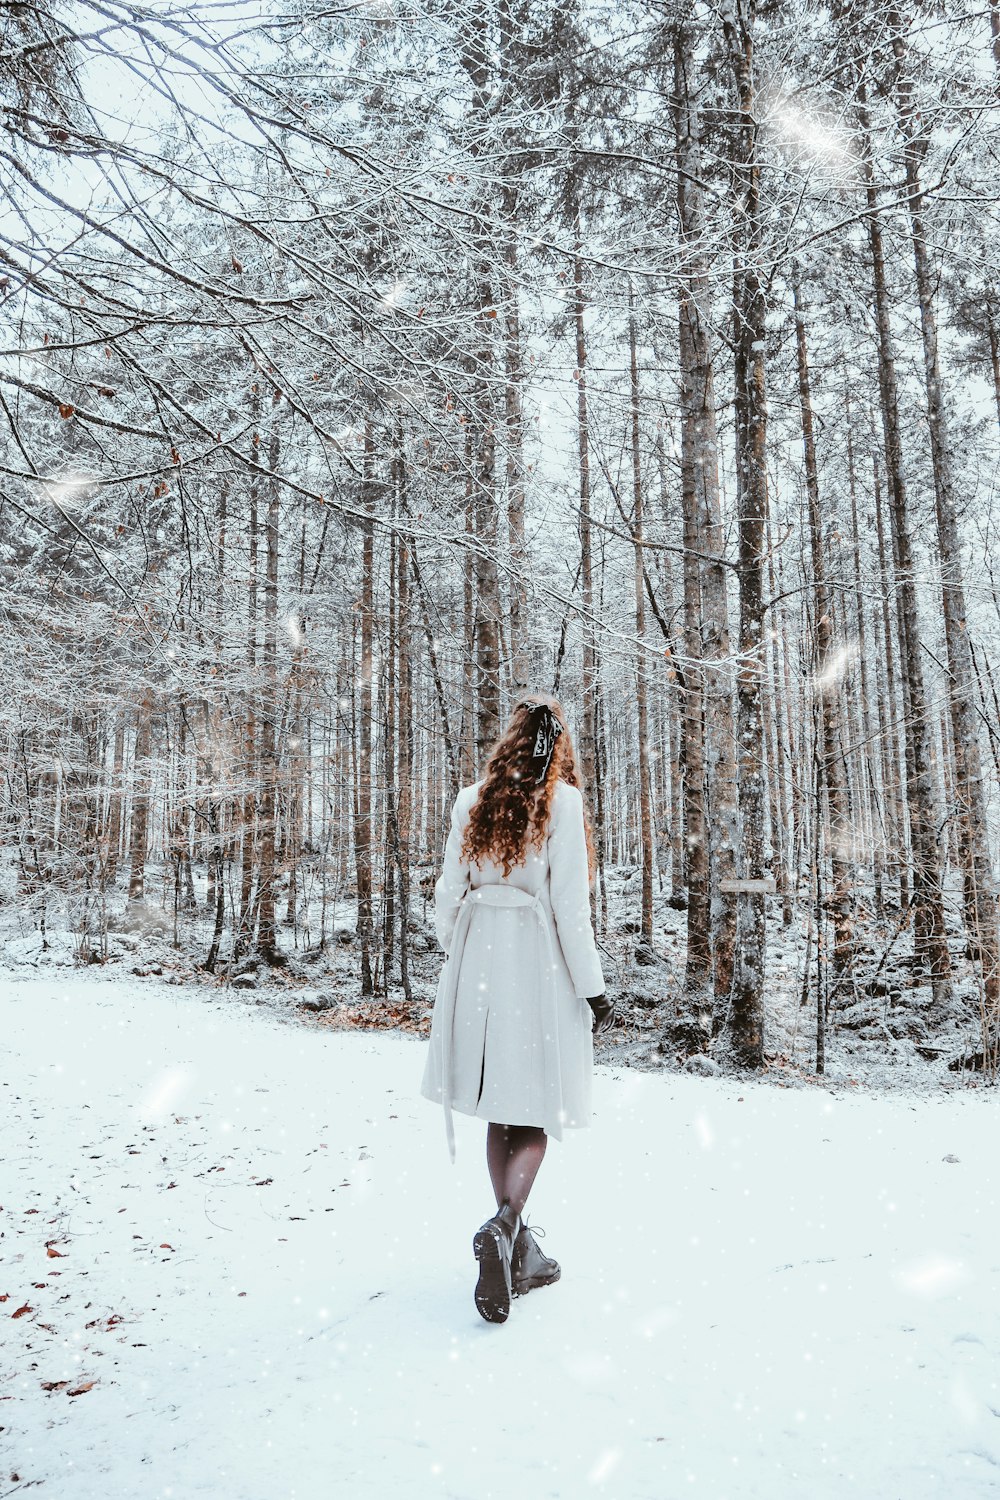 woman in white dress standing on snow covered ground surrounded by bare trees during daytime